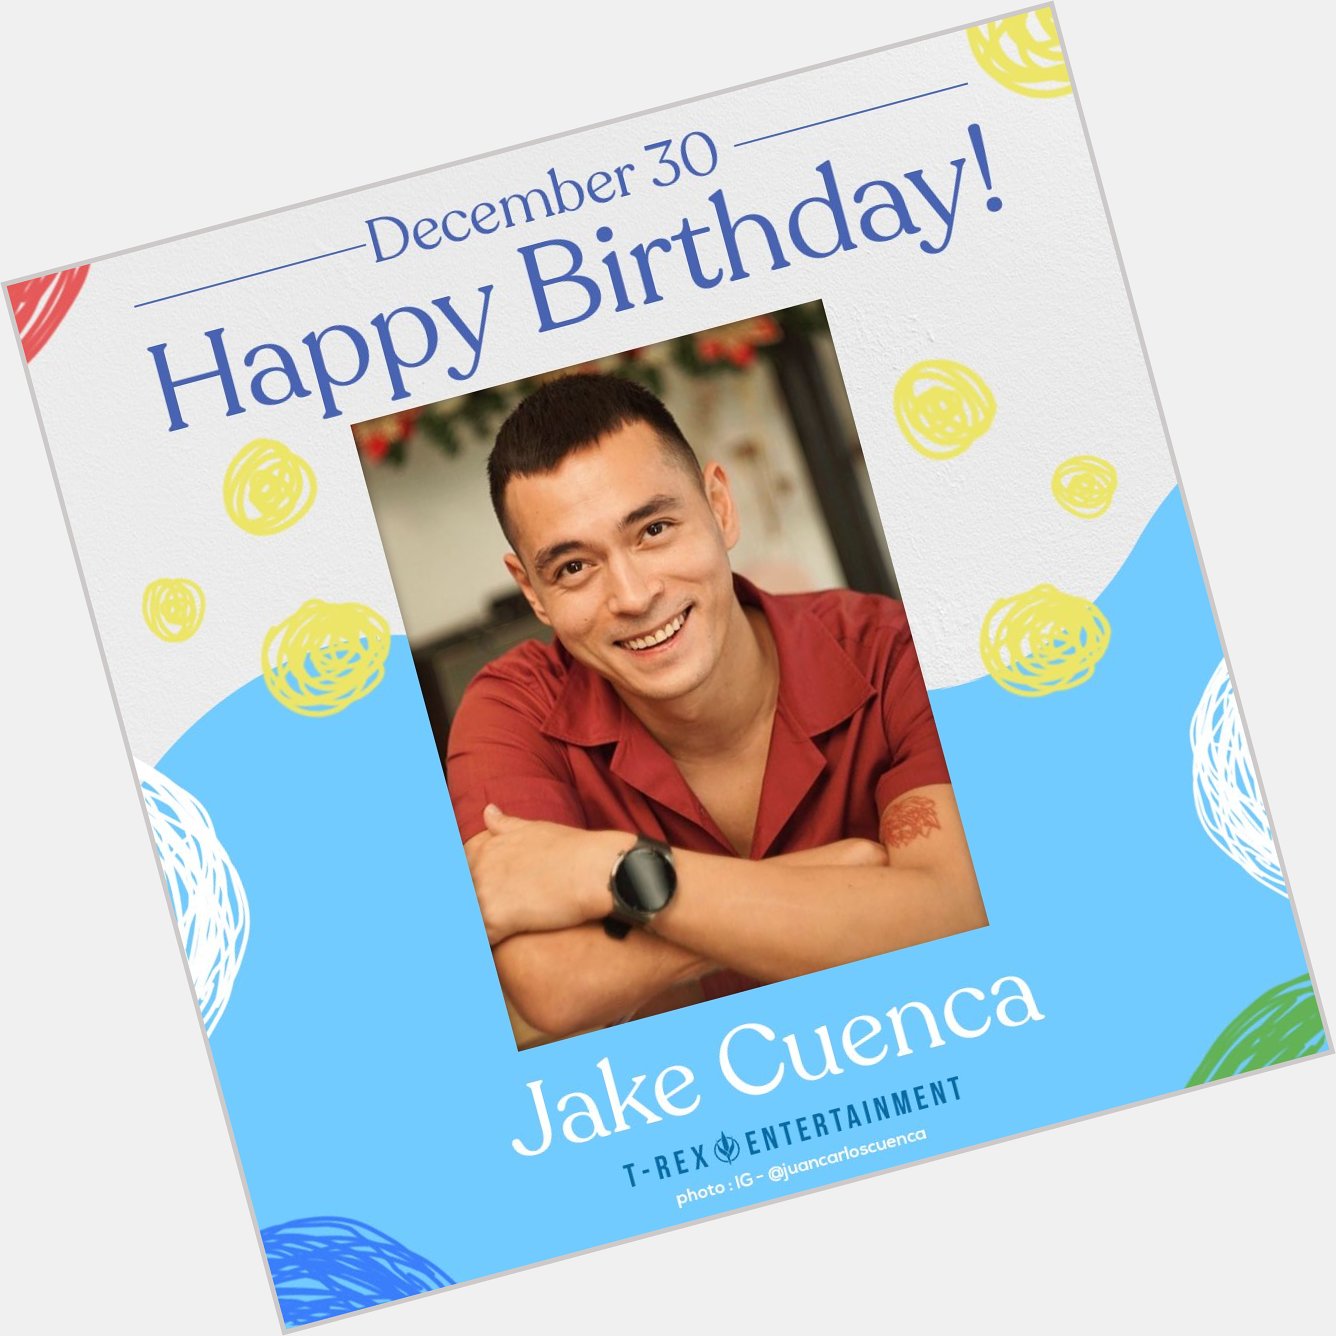 Happy birthday to you, Jake Cuenca! We wish you all the best! Trivia: His full name is Juan Carlos Cuenca. 